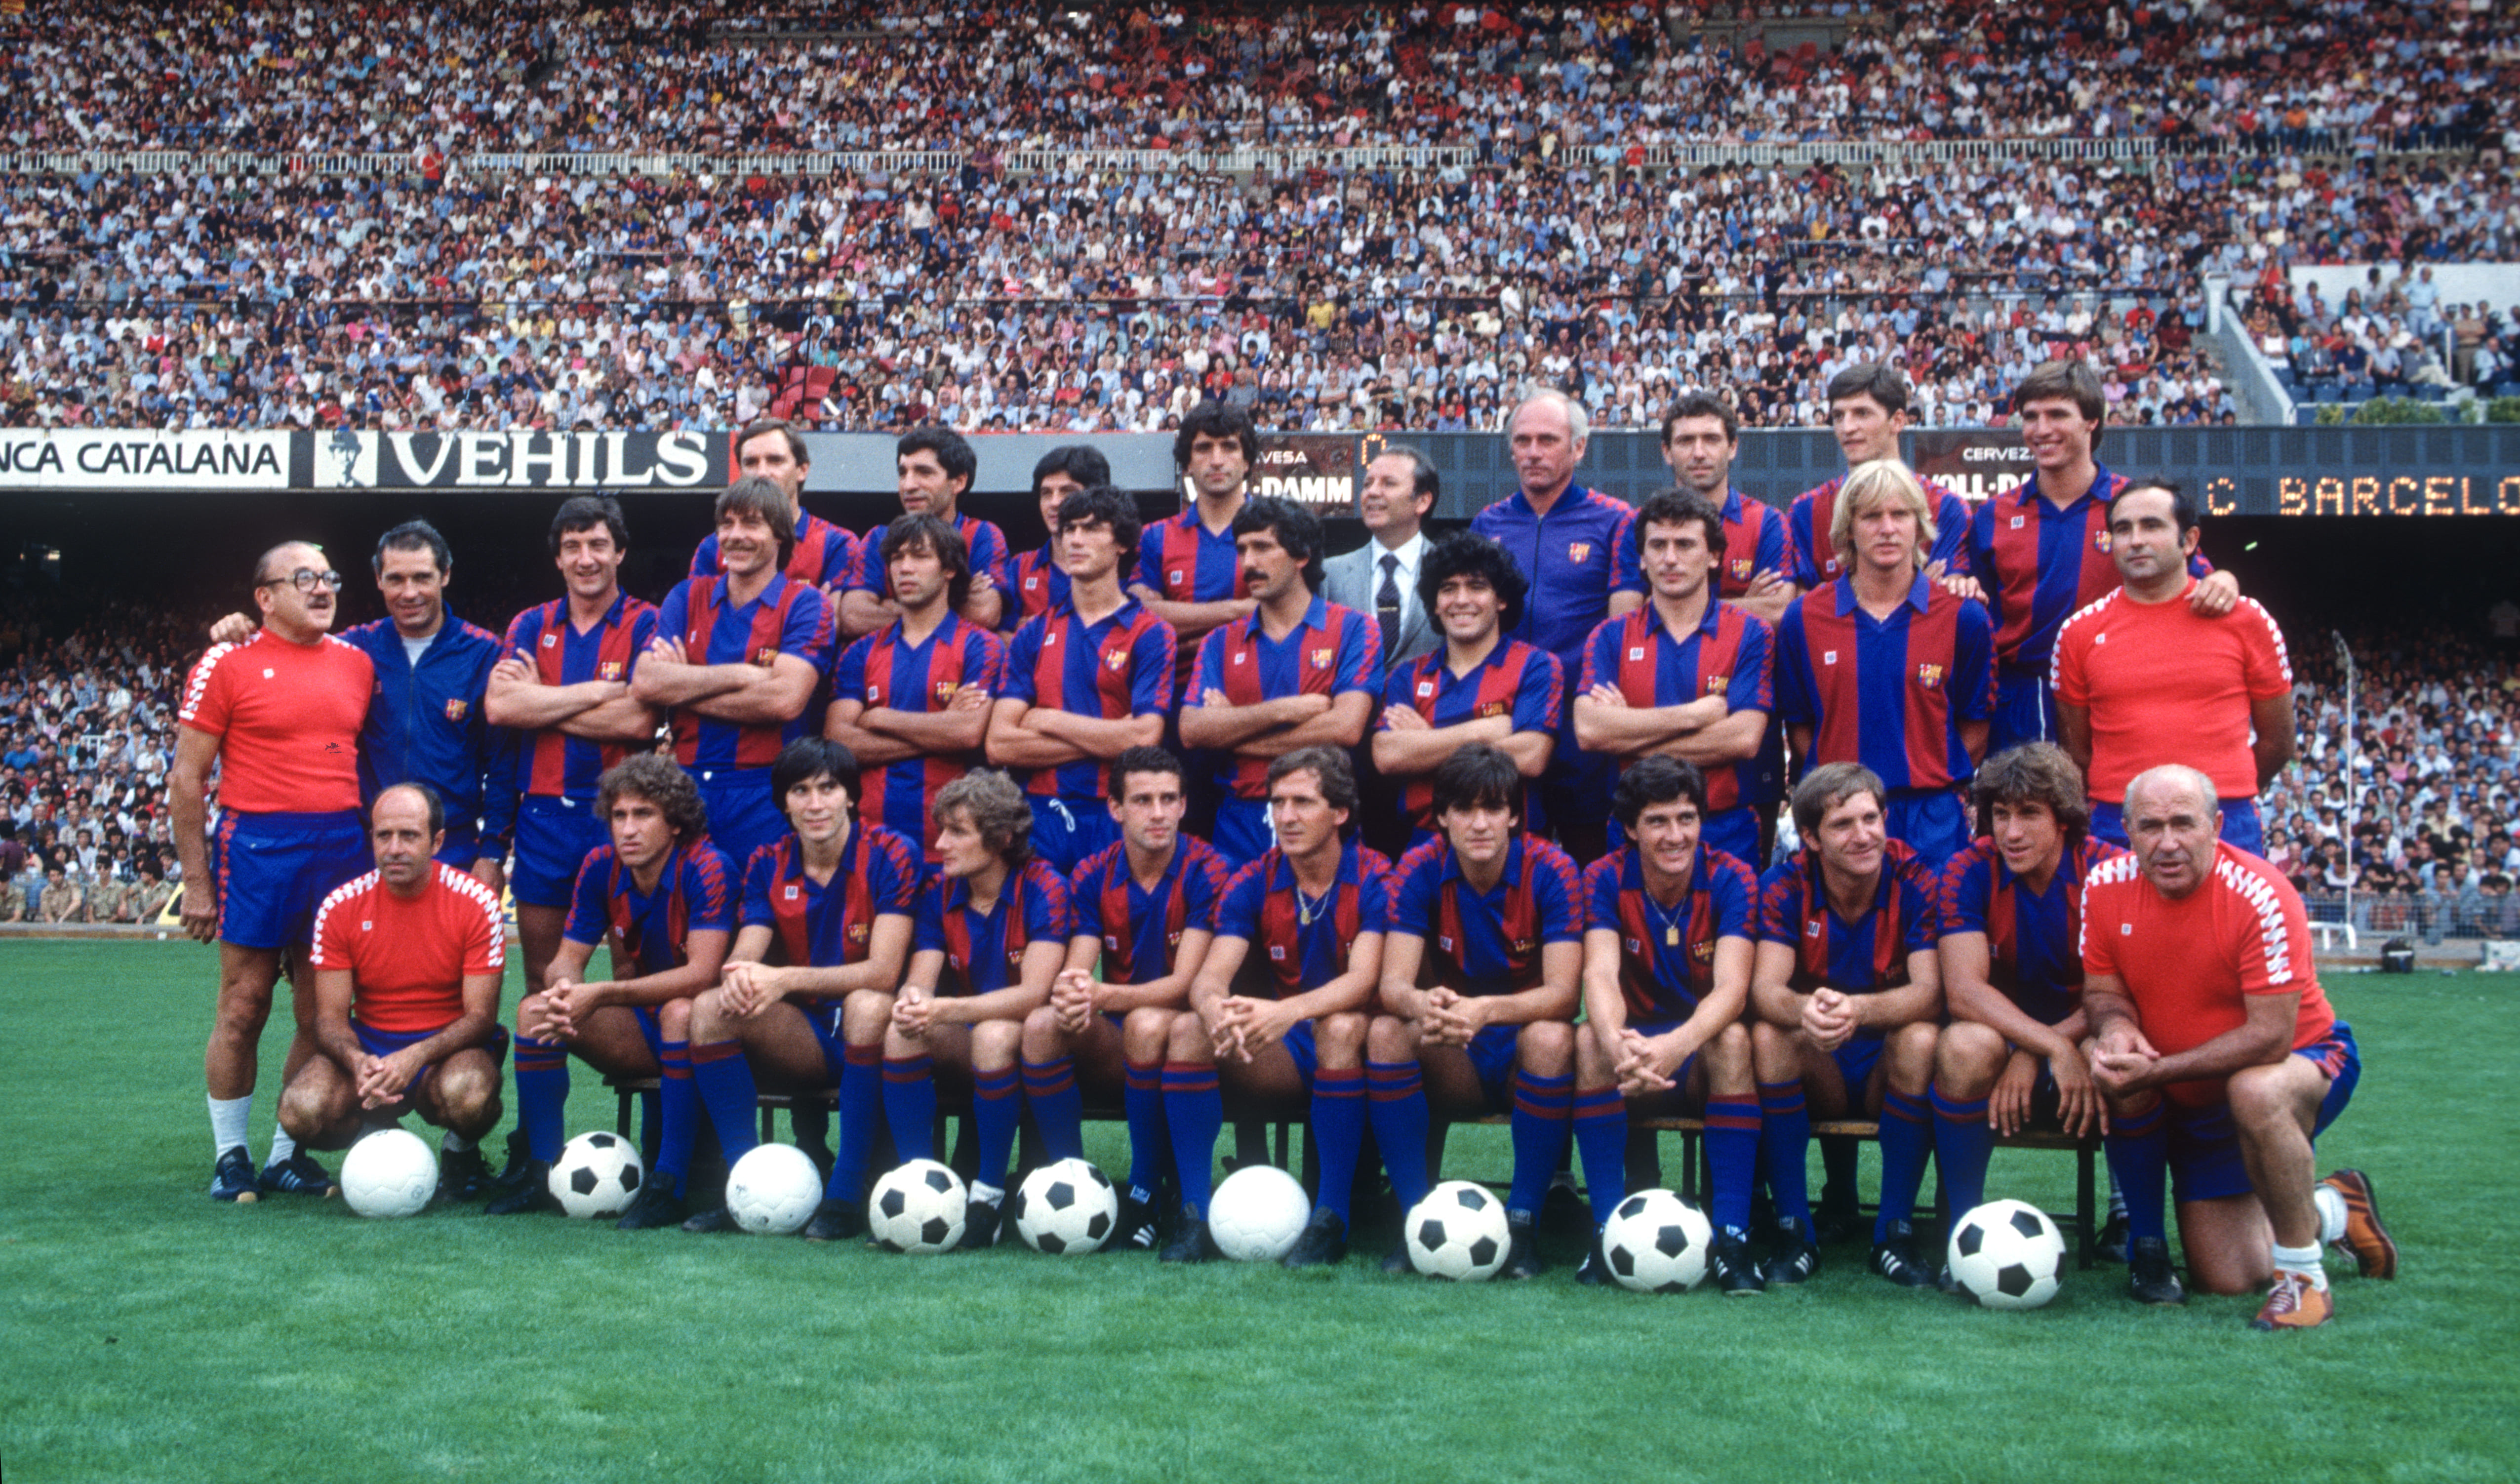 Jose Ramon Alexanko (fourth from left, top row) lines up with his Barcelona team-mates for the club's official photo ahead of the 1982/83 season.